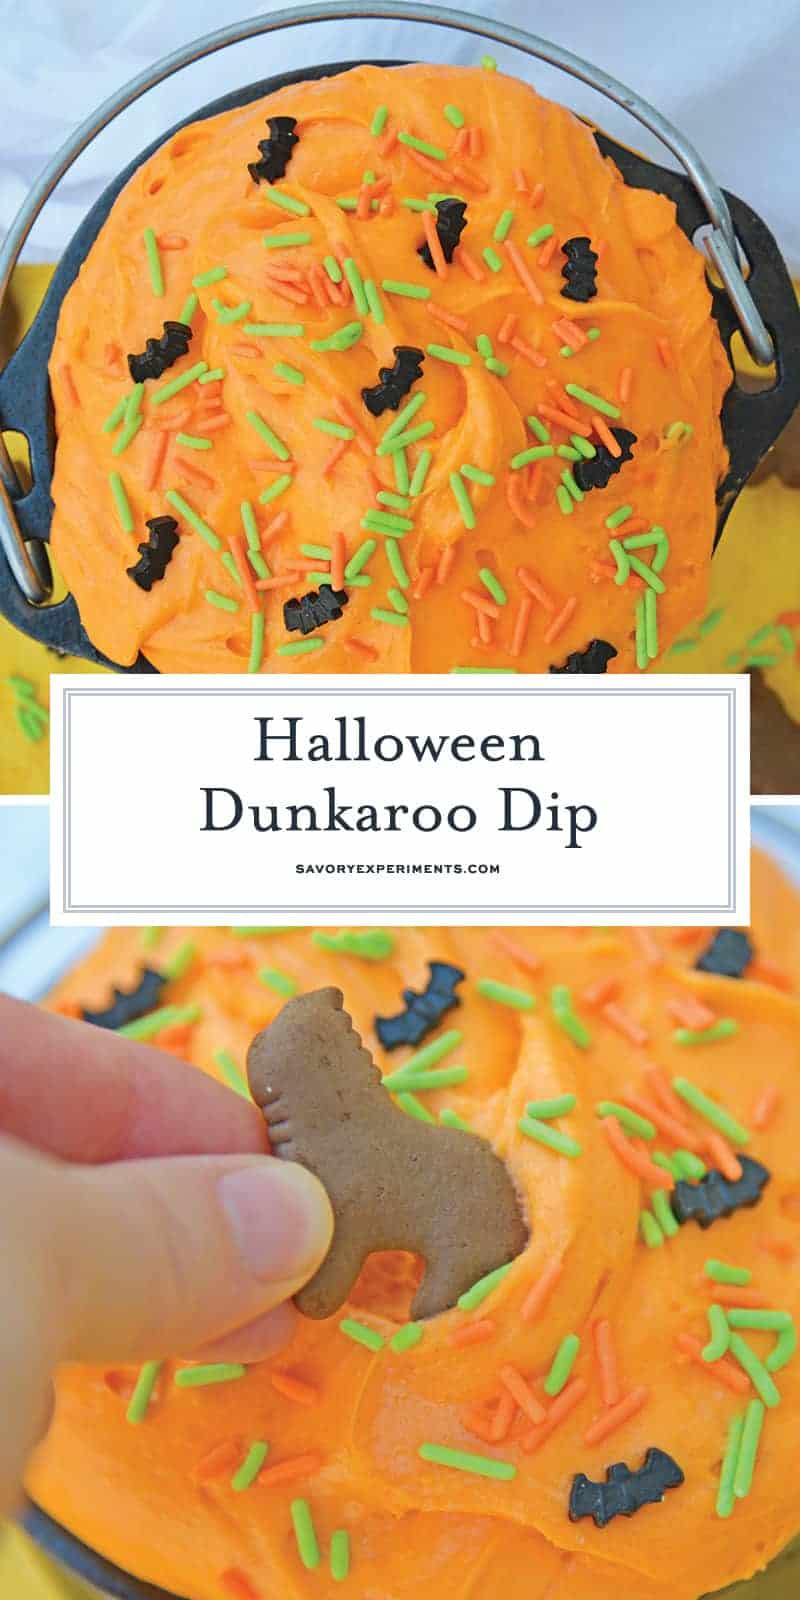 Halloween Dunkaroo Dip is a quick and easy cake batter dip that will become one of your go-to recipes for Halloween parties. #dunkaroodip #cakebatterdip www.savoryexperiments.com 